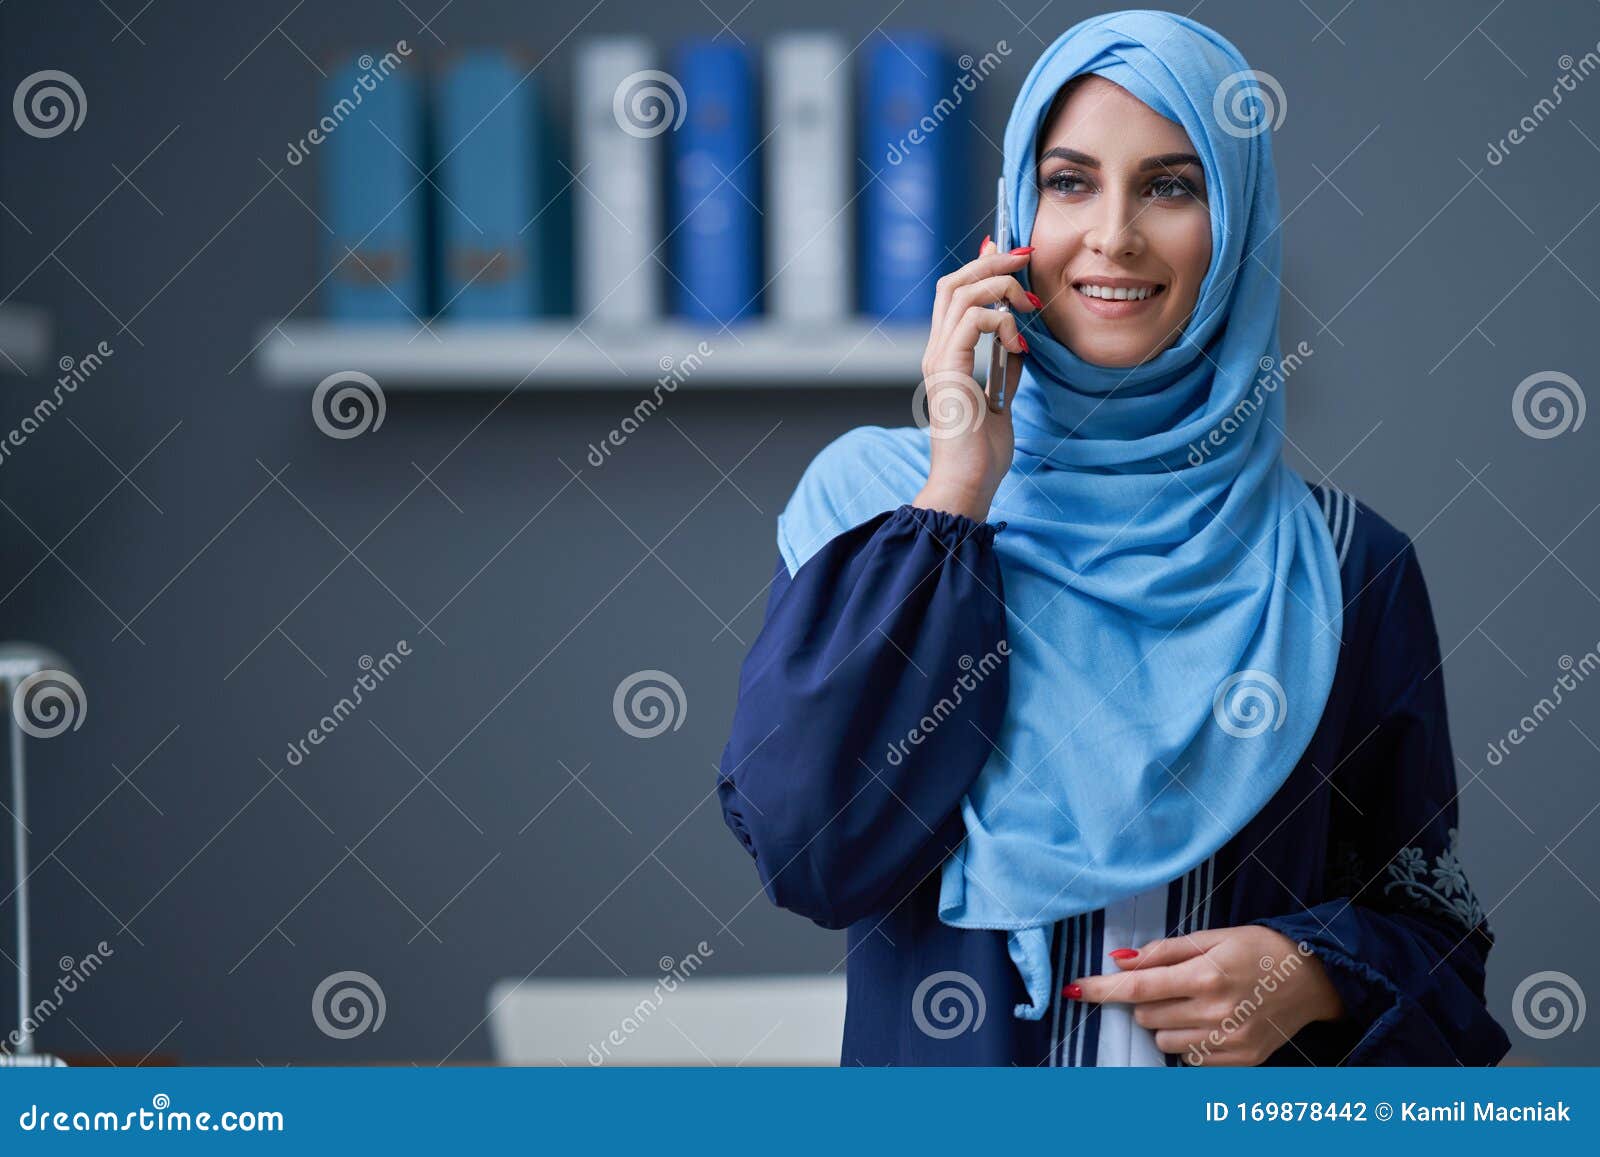 Muslim Adult Woman Using Smartphone Stock Photo - Image of attractive ...